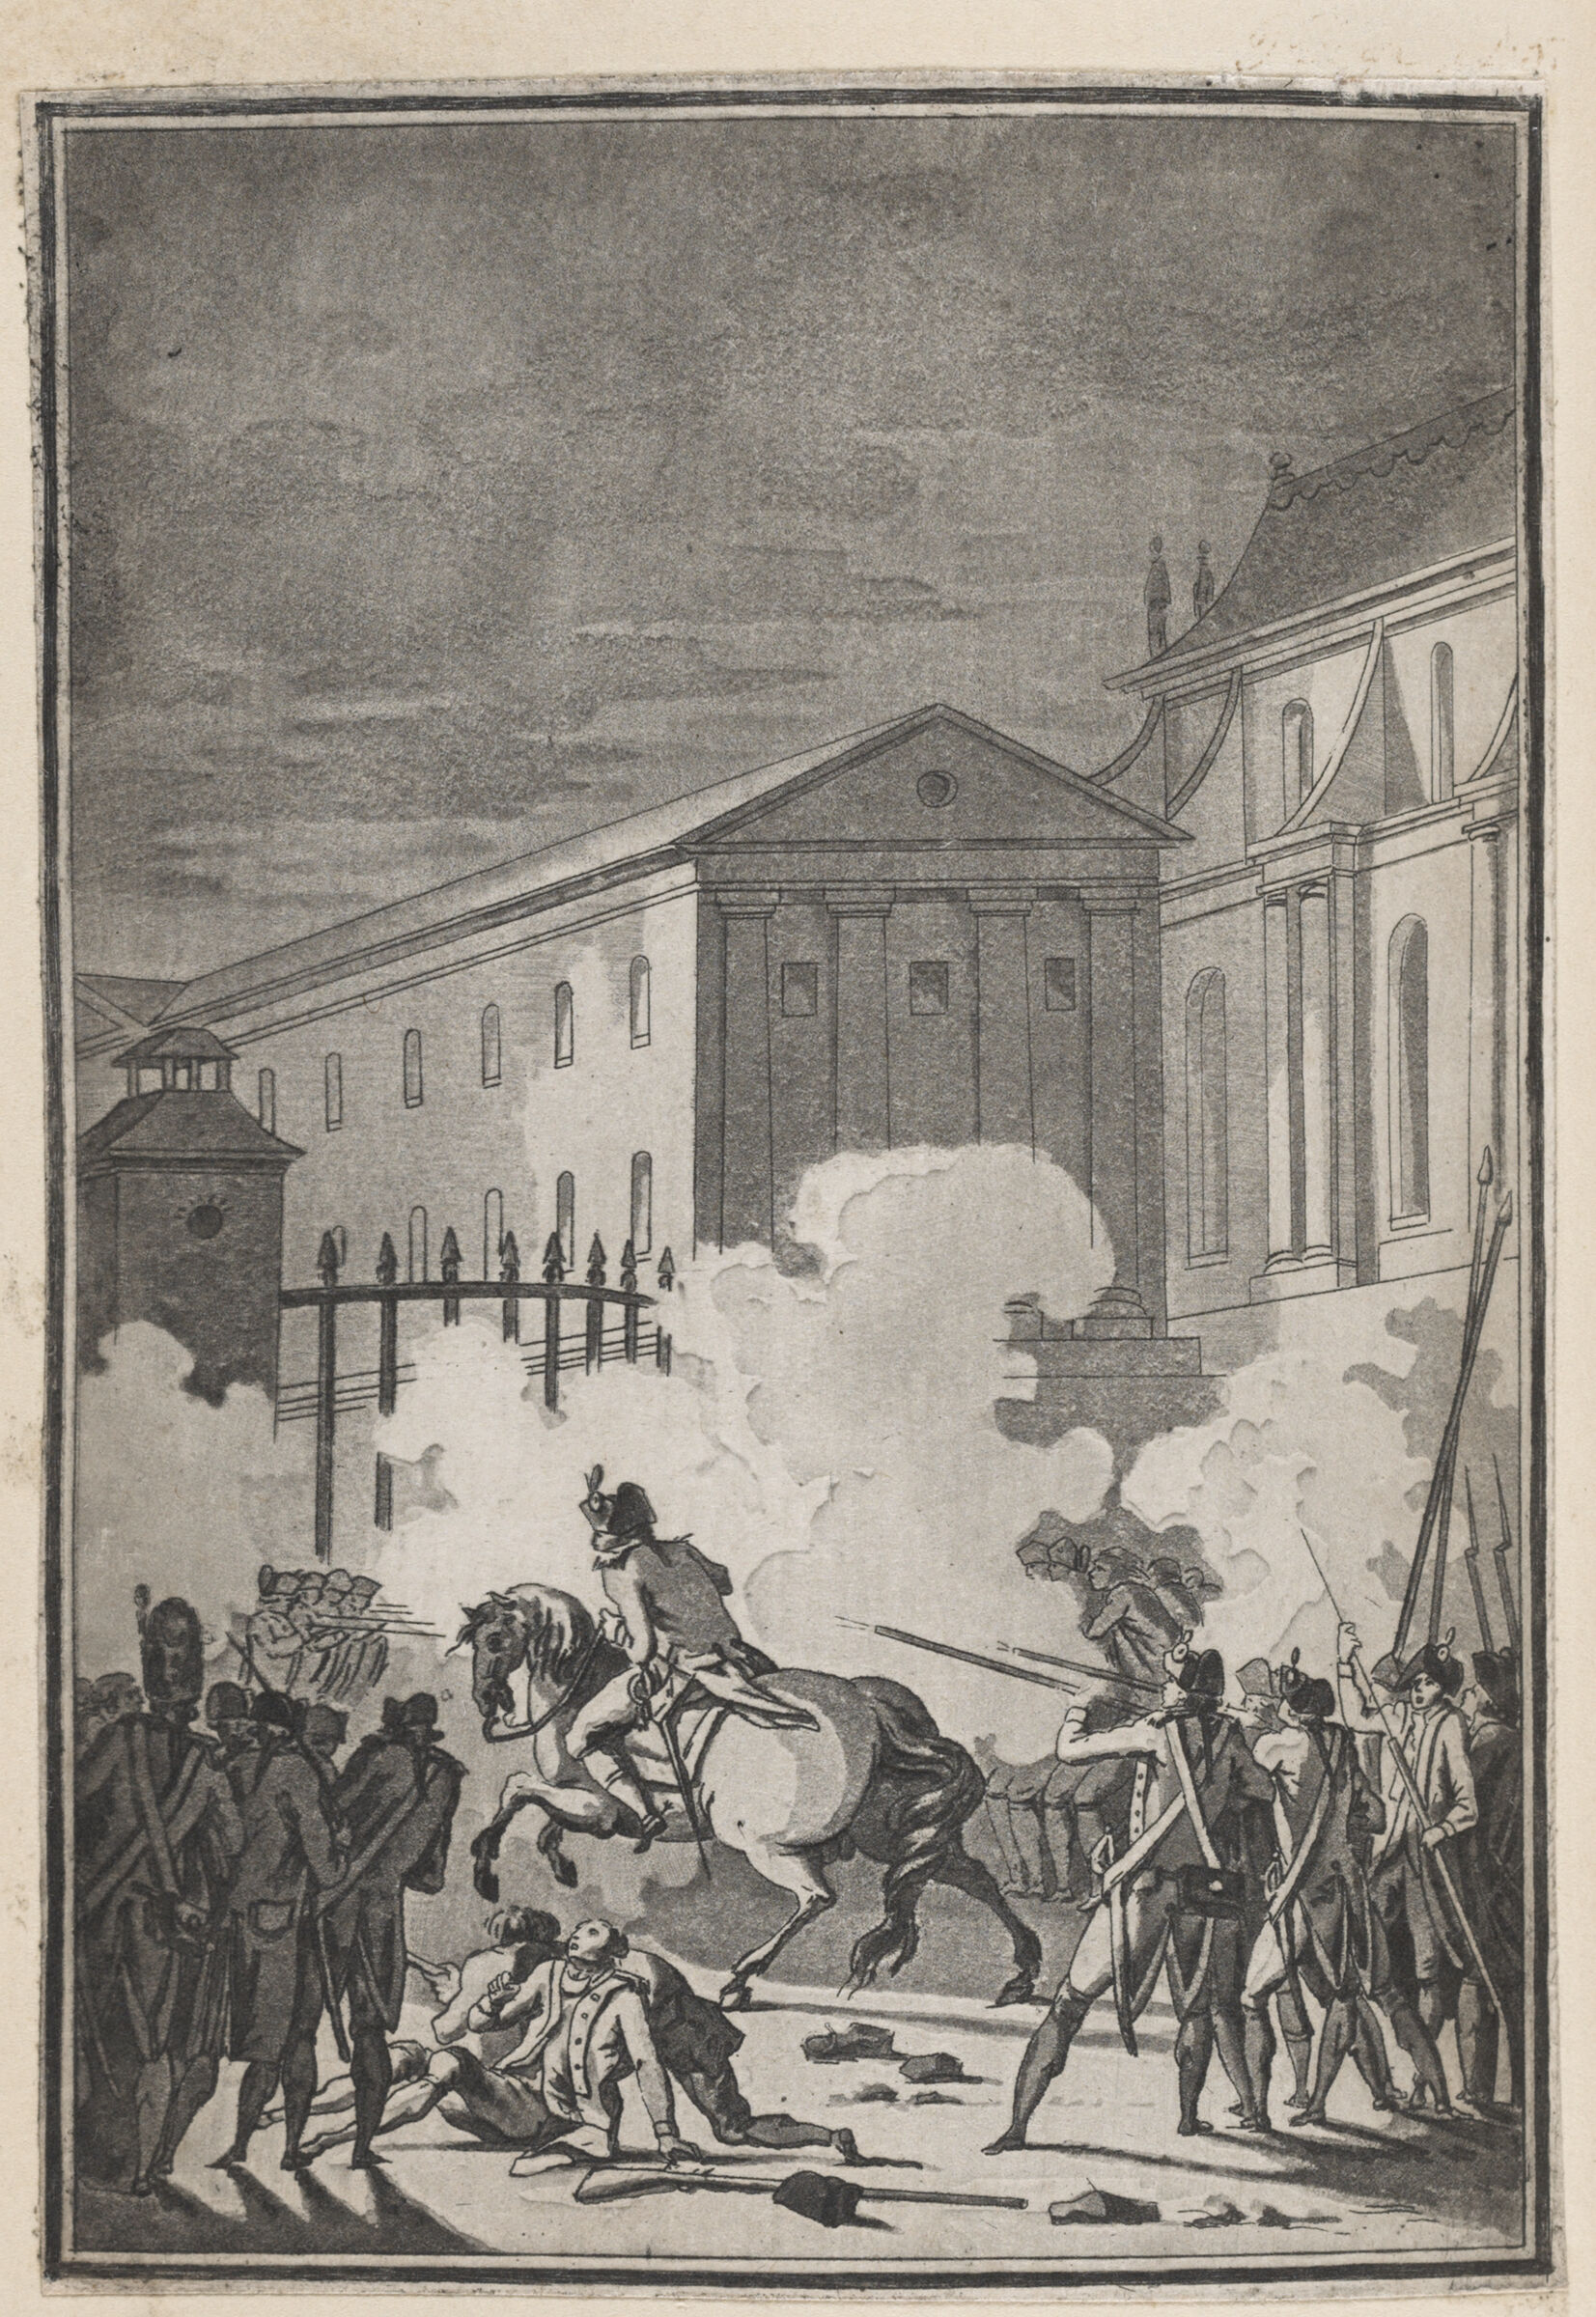 The Aide-De-Camps Of M. De Lafayette Passes Through Gunfire To Carry Out His Mission In The Service Of The King (5 October 1789)